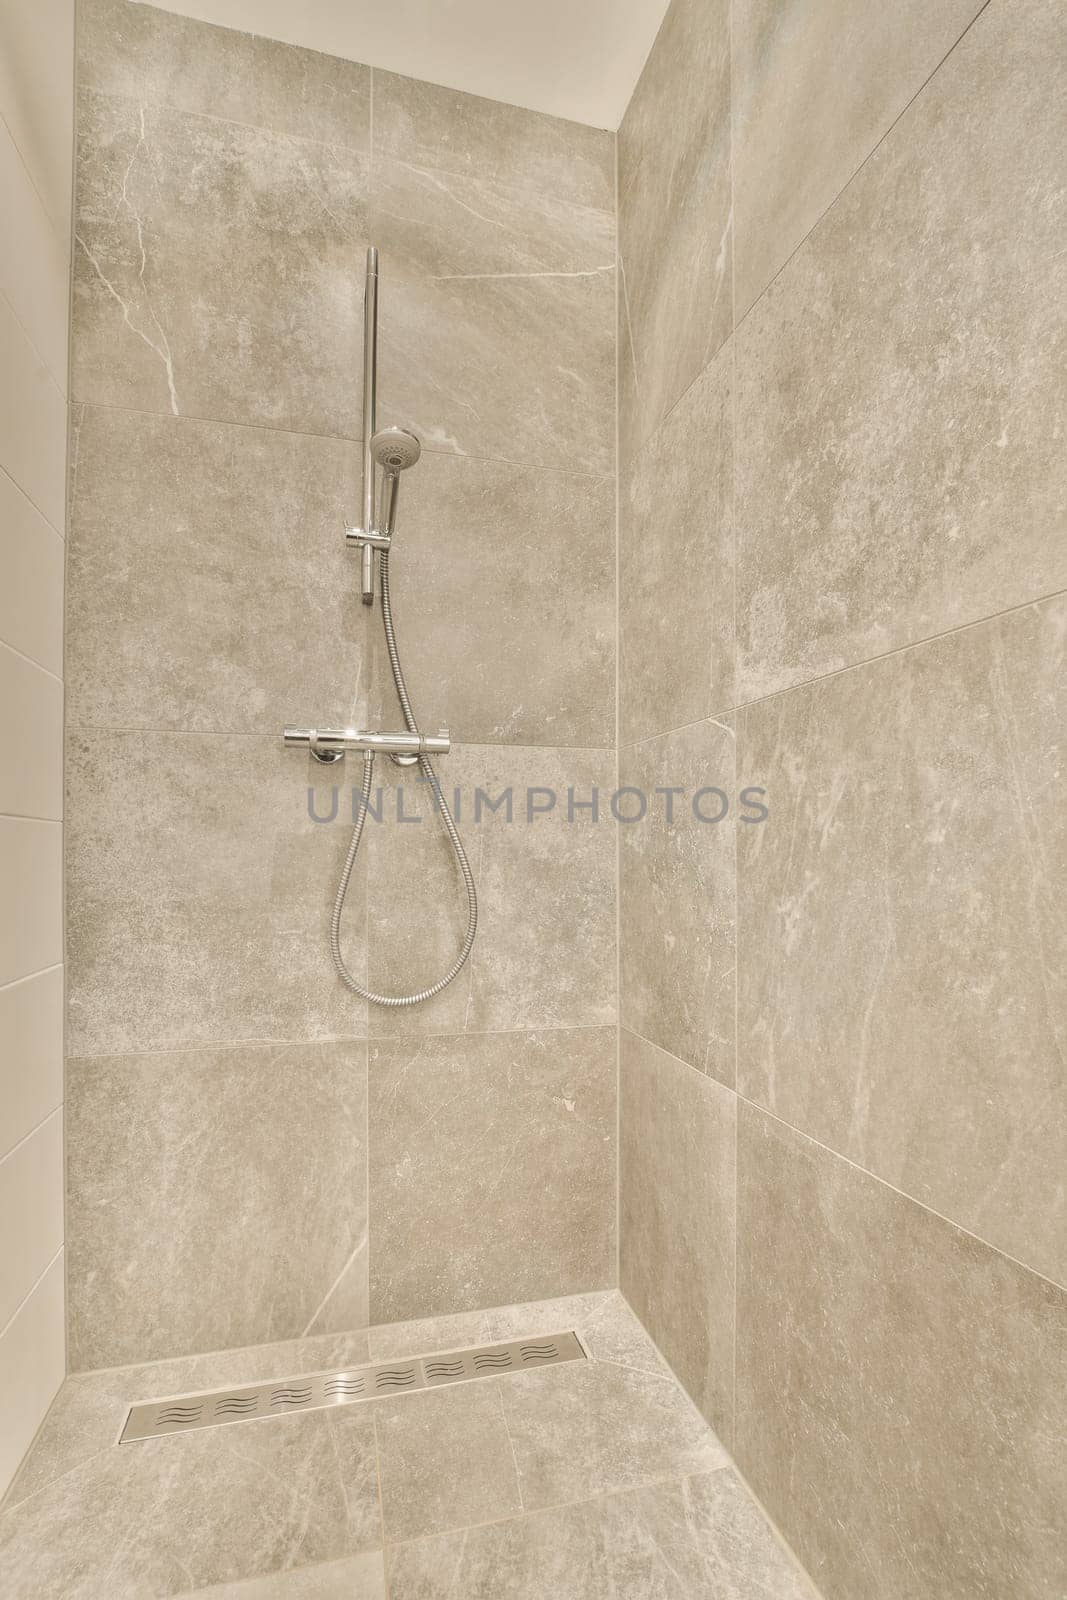 a shower in a bathroom with marble tiles on the walls and flooring around the shower head, which is attached to the wall